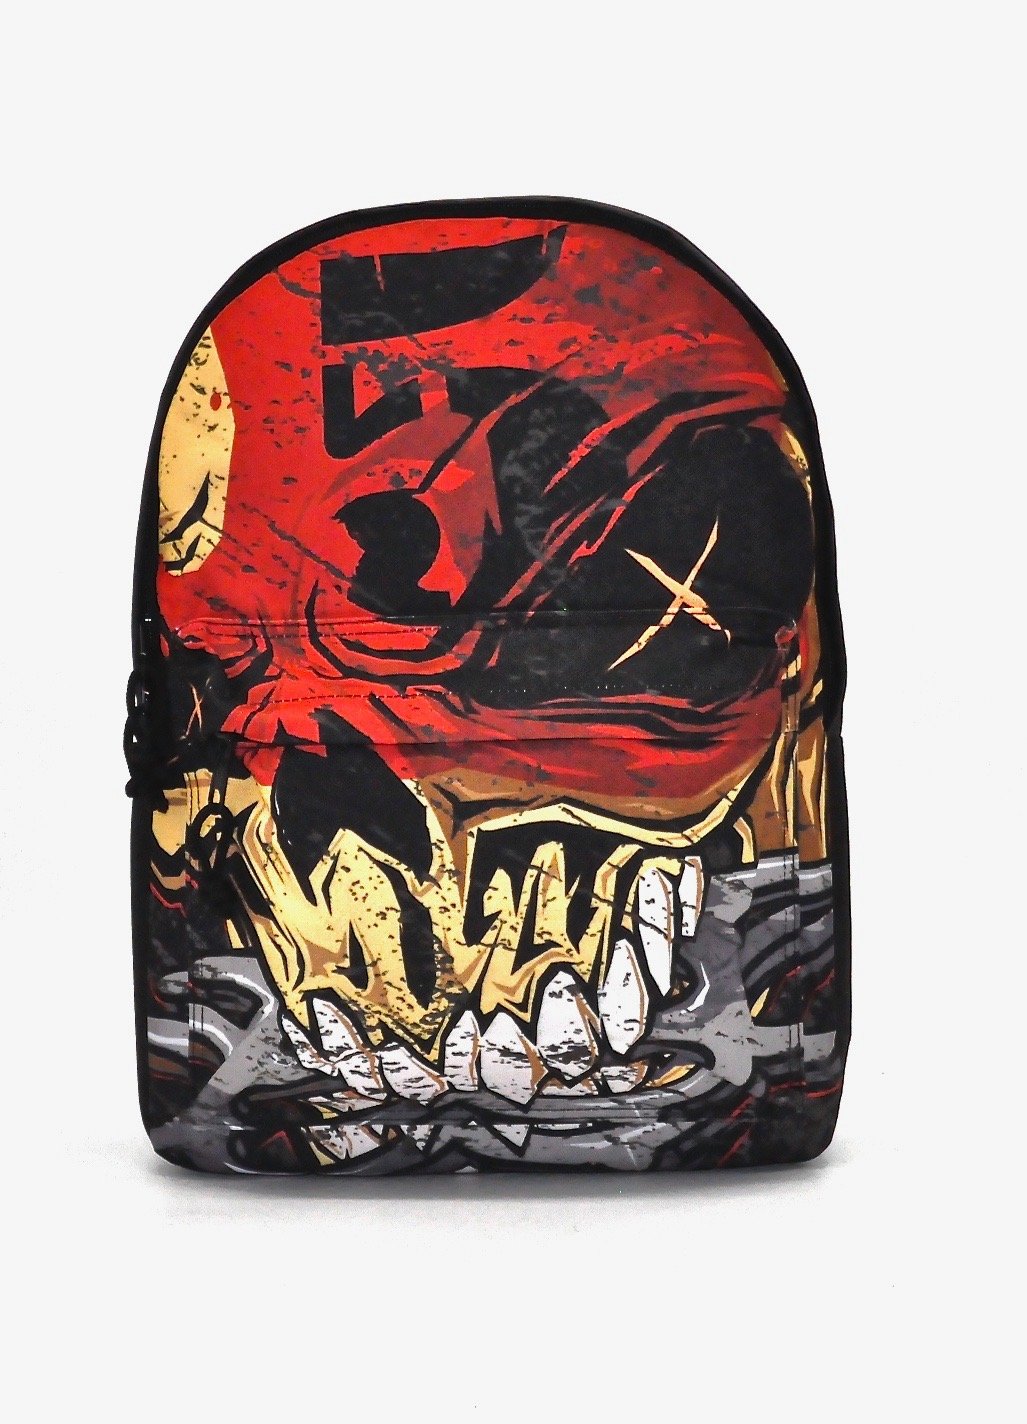 Wholesale Rocksax Five Finger Death Punch Daypack - The Way Of The Fist